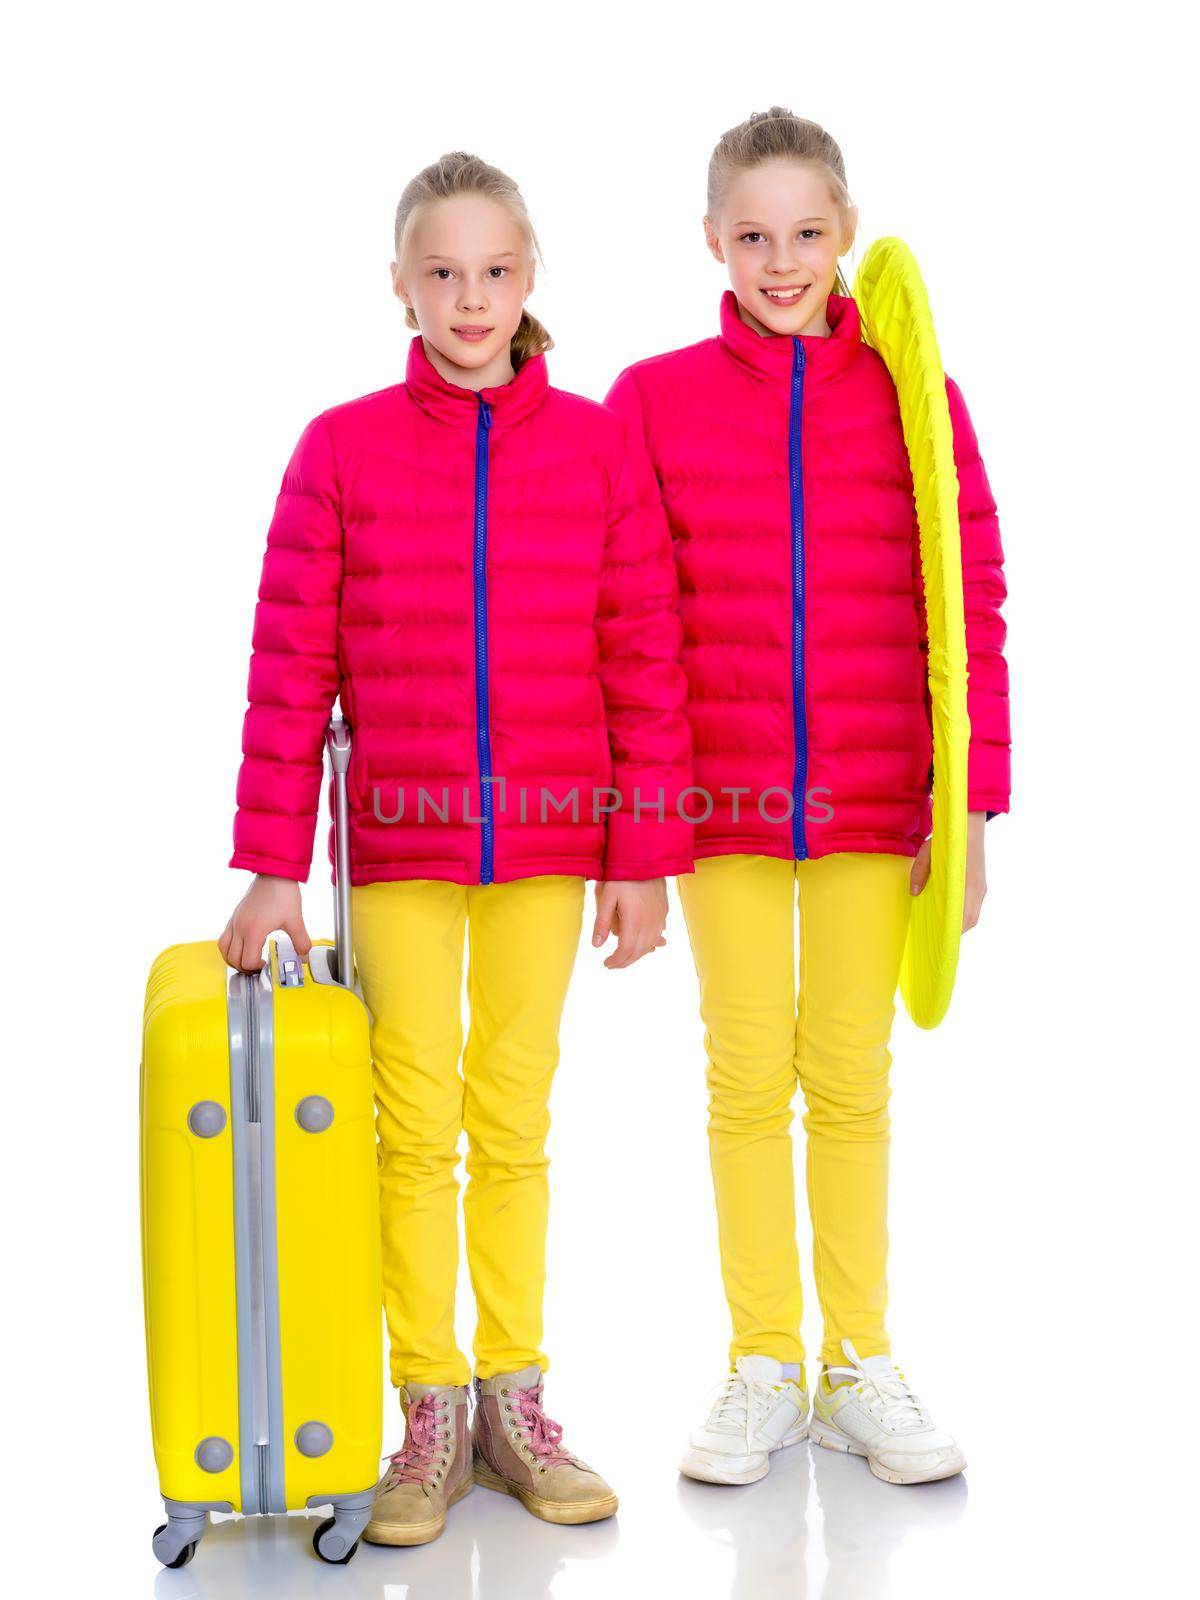 Two cute little girls with large suitcases prepared for the journey. Isolated on white background.